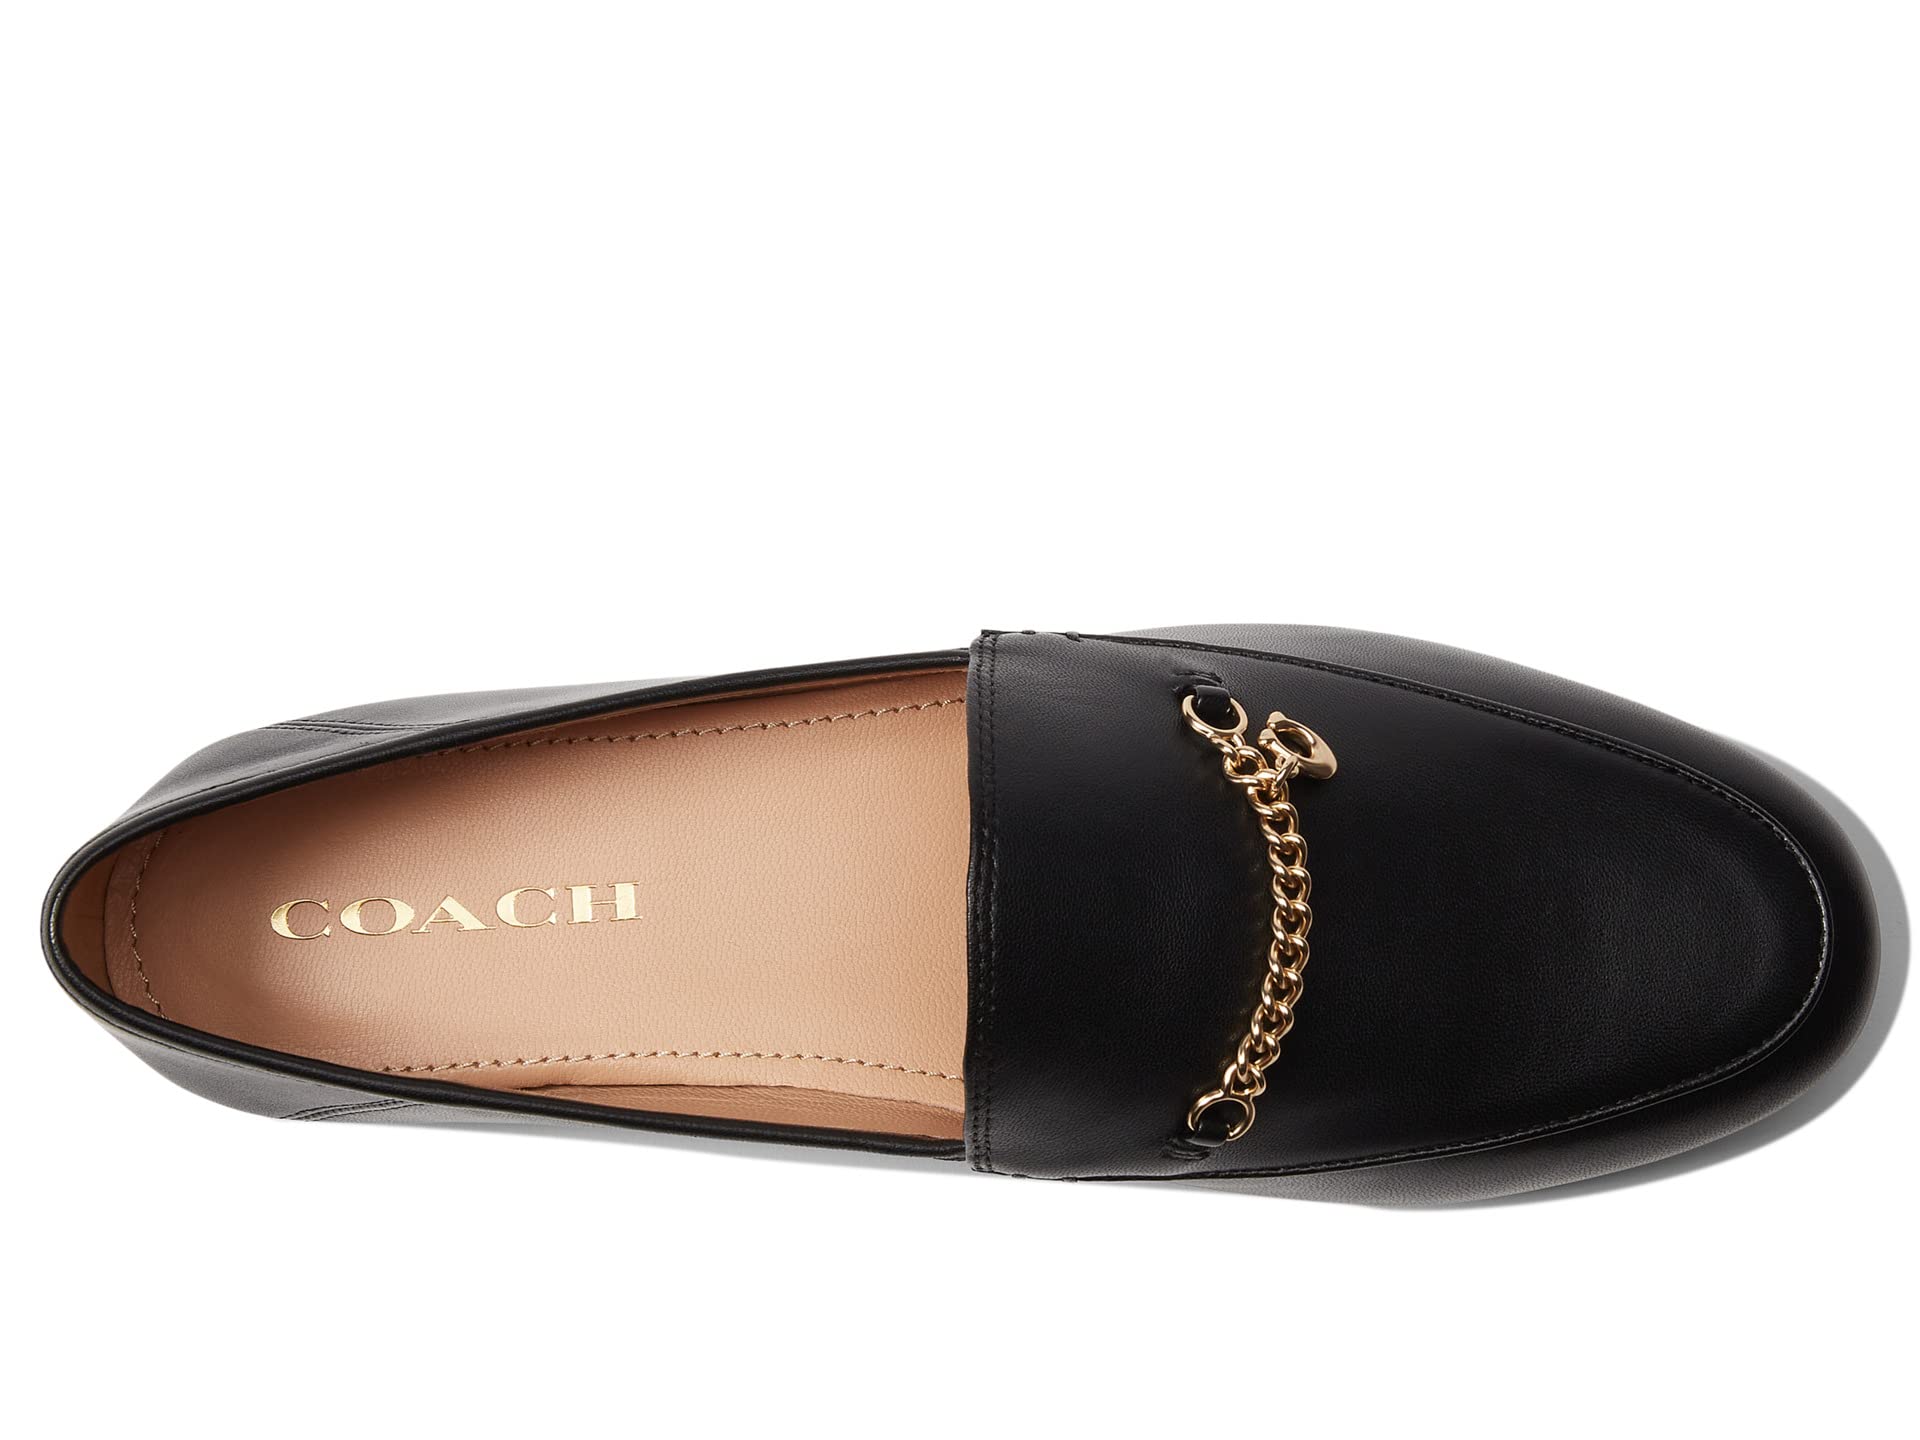 COACH Hanna Leather Loafer